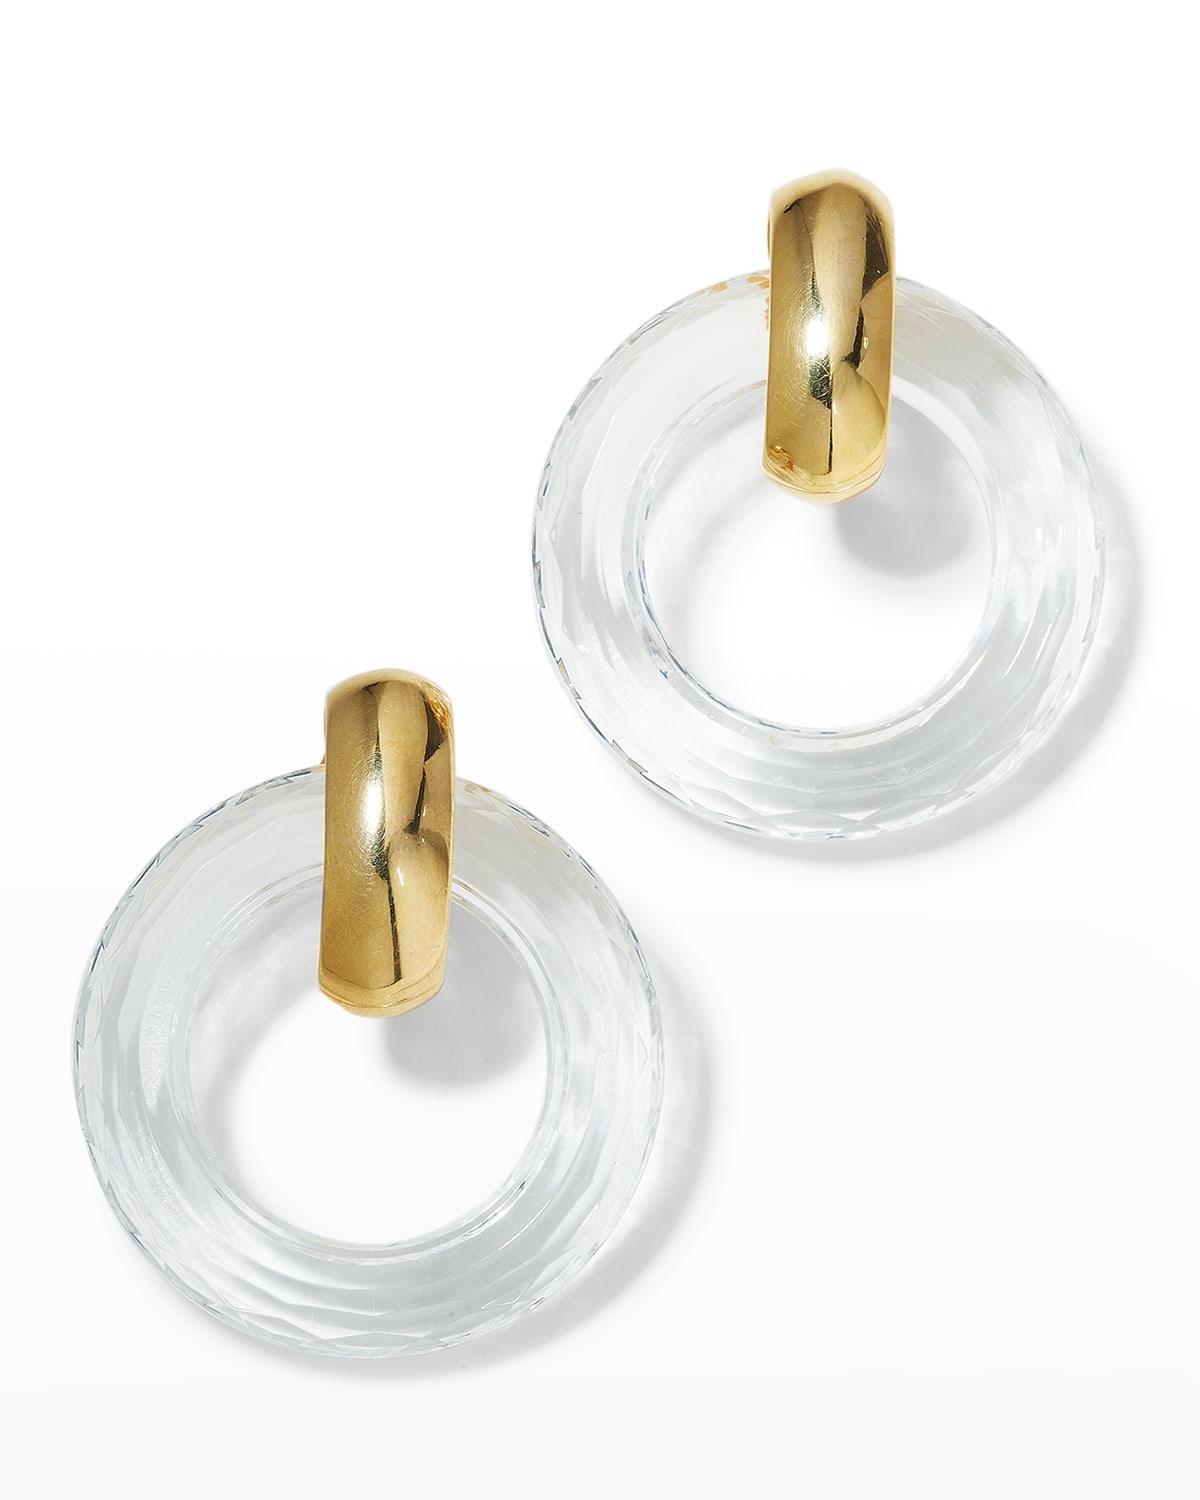 KENNETH JAY LANE POLISHED GOLD WITH TEXTURED CLEAR OPEN RING DROP EARRINGS